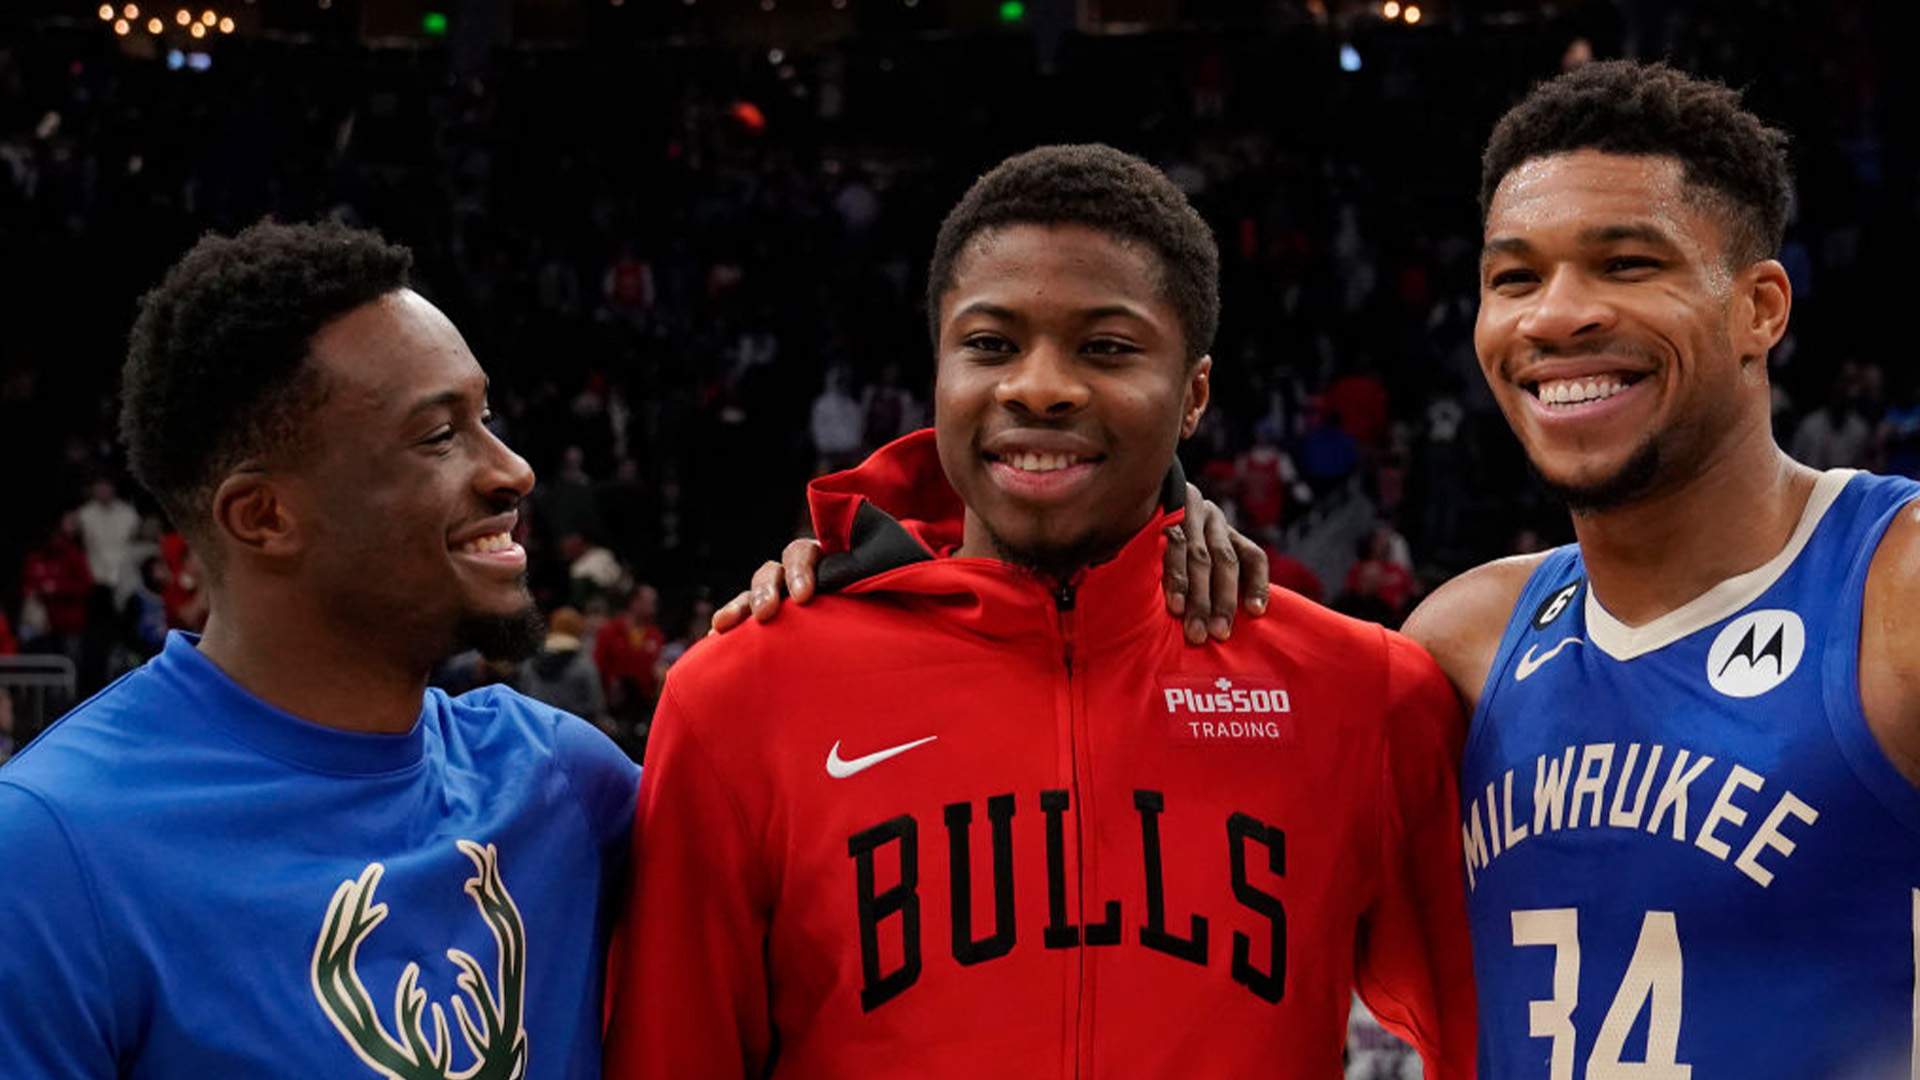 Giannis Antetokounmpo Launches Company Alongside His Brothers — 'My Family Is Building A Business That We Can Be Proud Of'